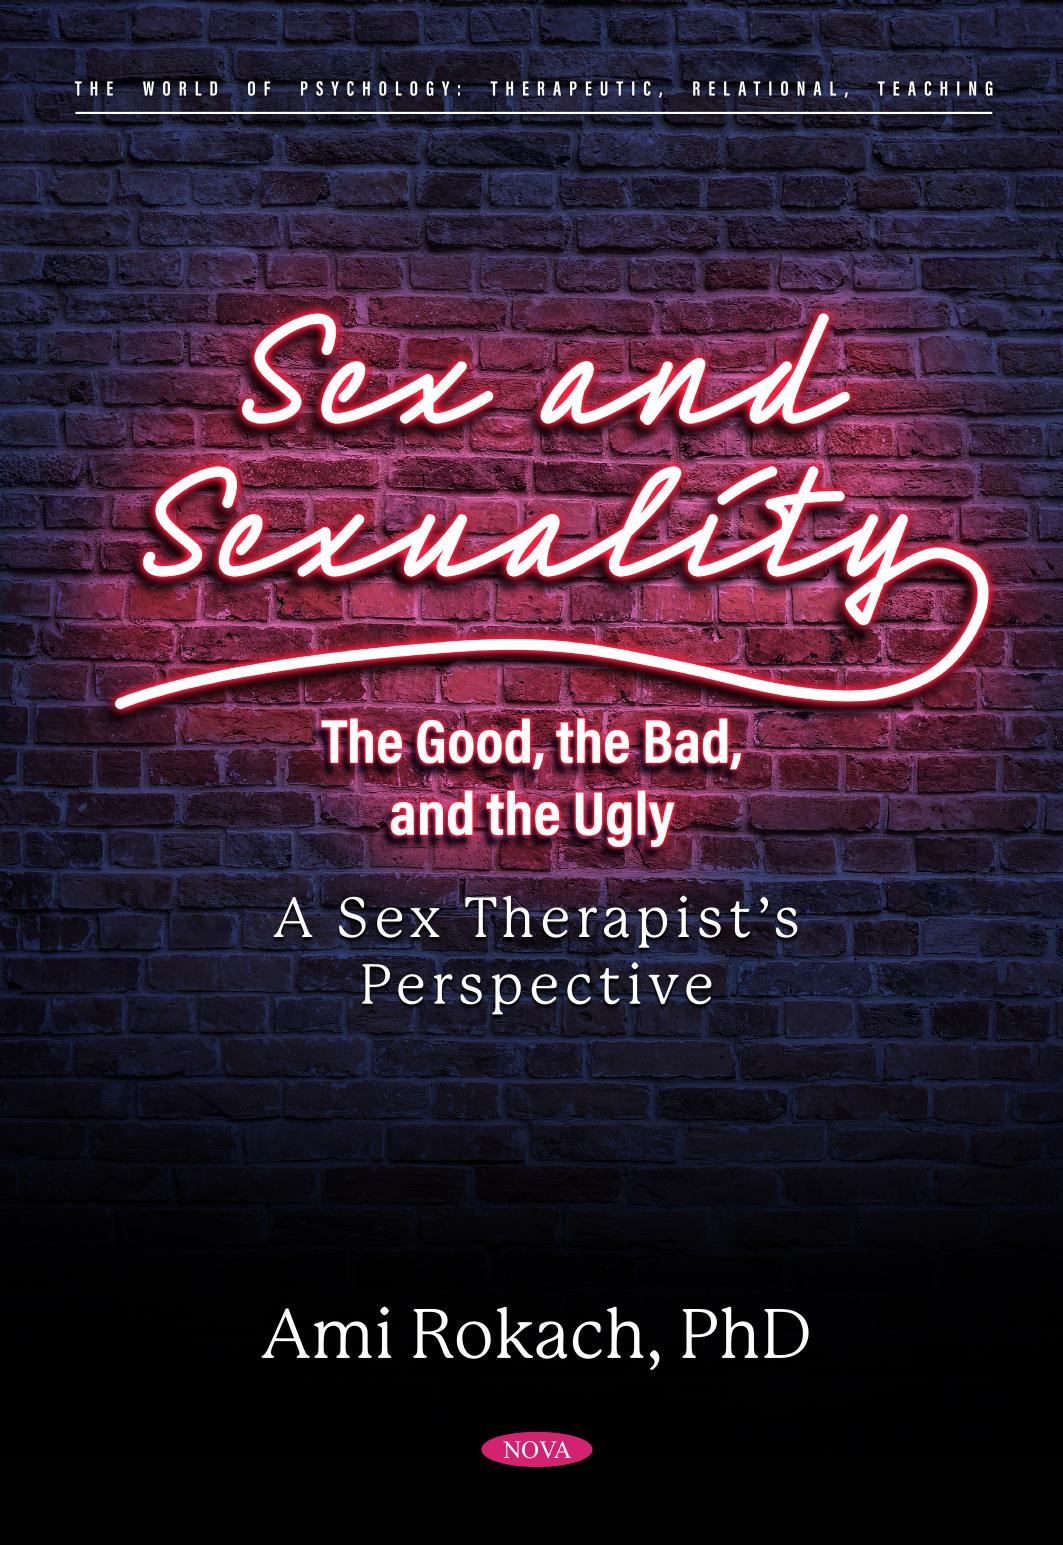 Sex And Sexuality The Good The Bad And The Ugly A Sex Therapist S Perspective Softarchive